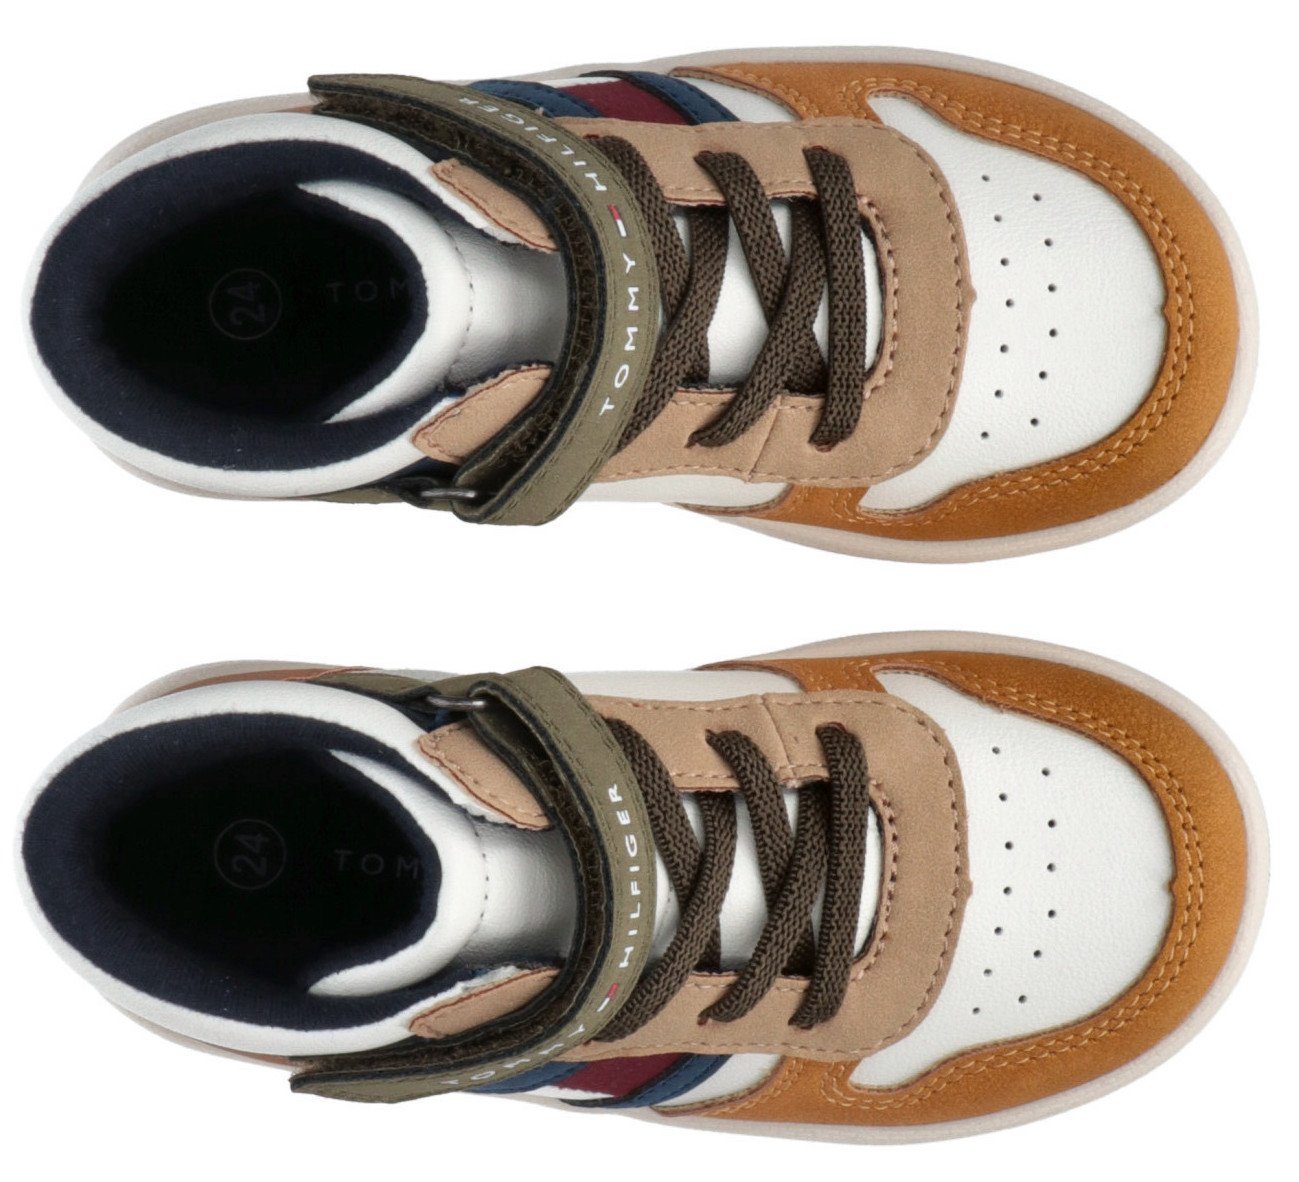 colorblocking FLAG Sneaker TOP modischen Tommy Look HIGH Hilfiger LACE-UP/VELCRO im SNEAKER